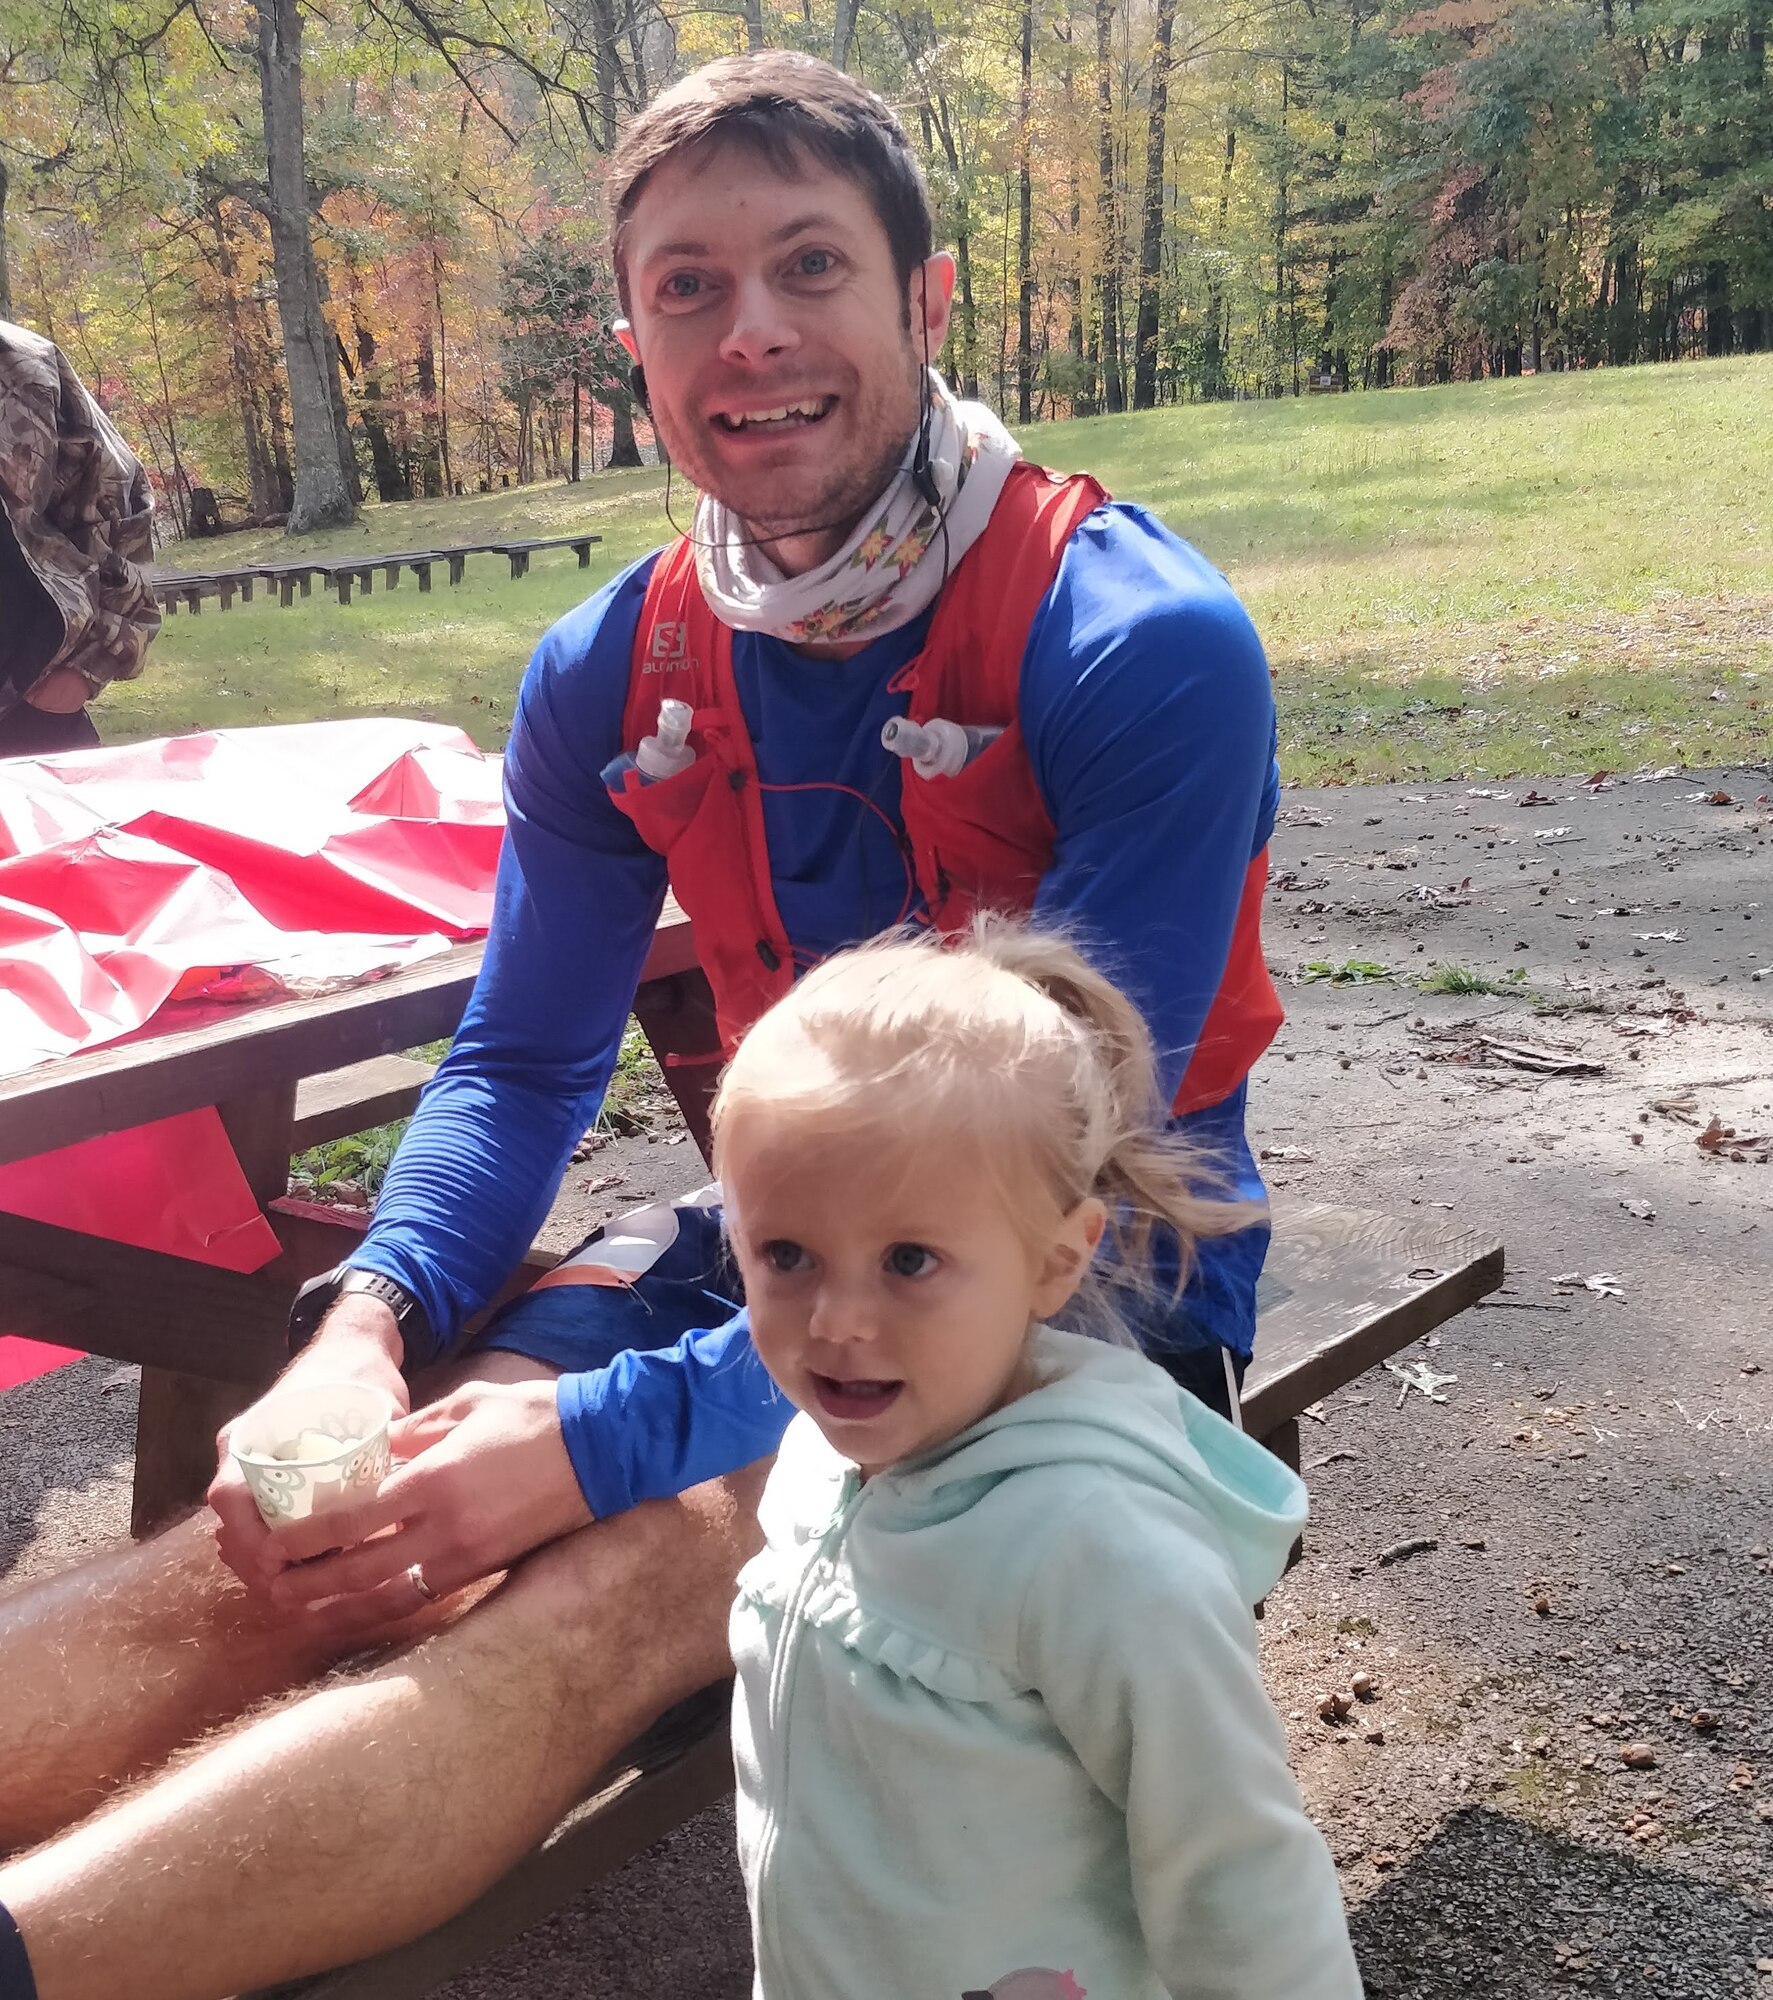 Capt. Kyle Imhoff takes a break during the race with is daughter.